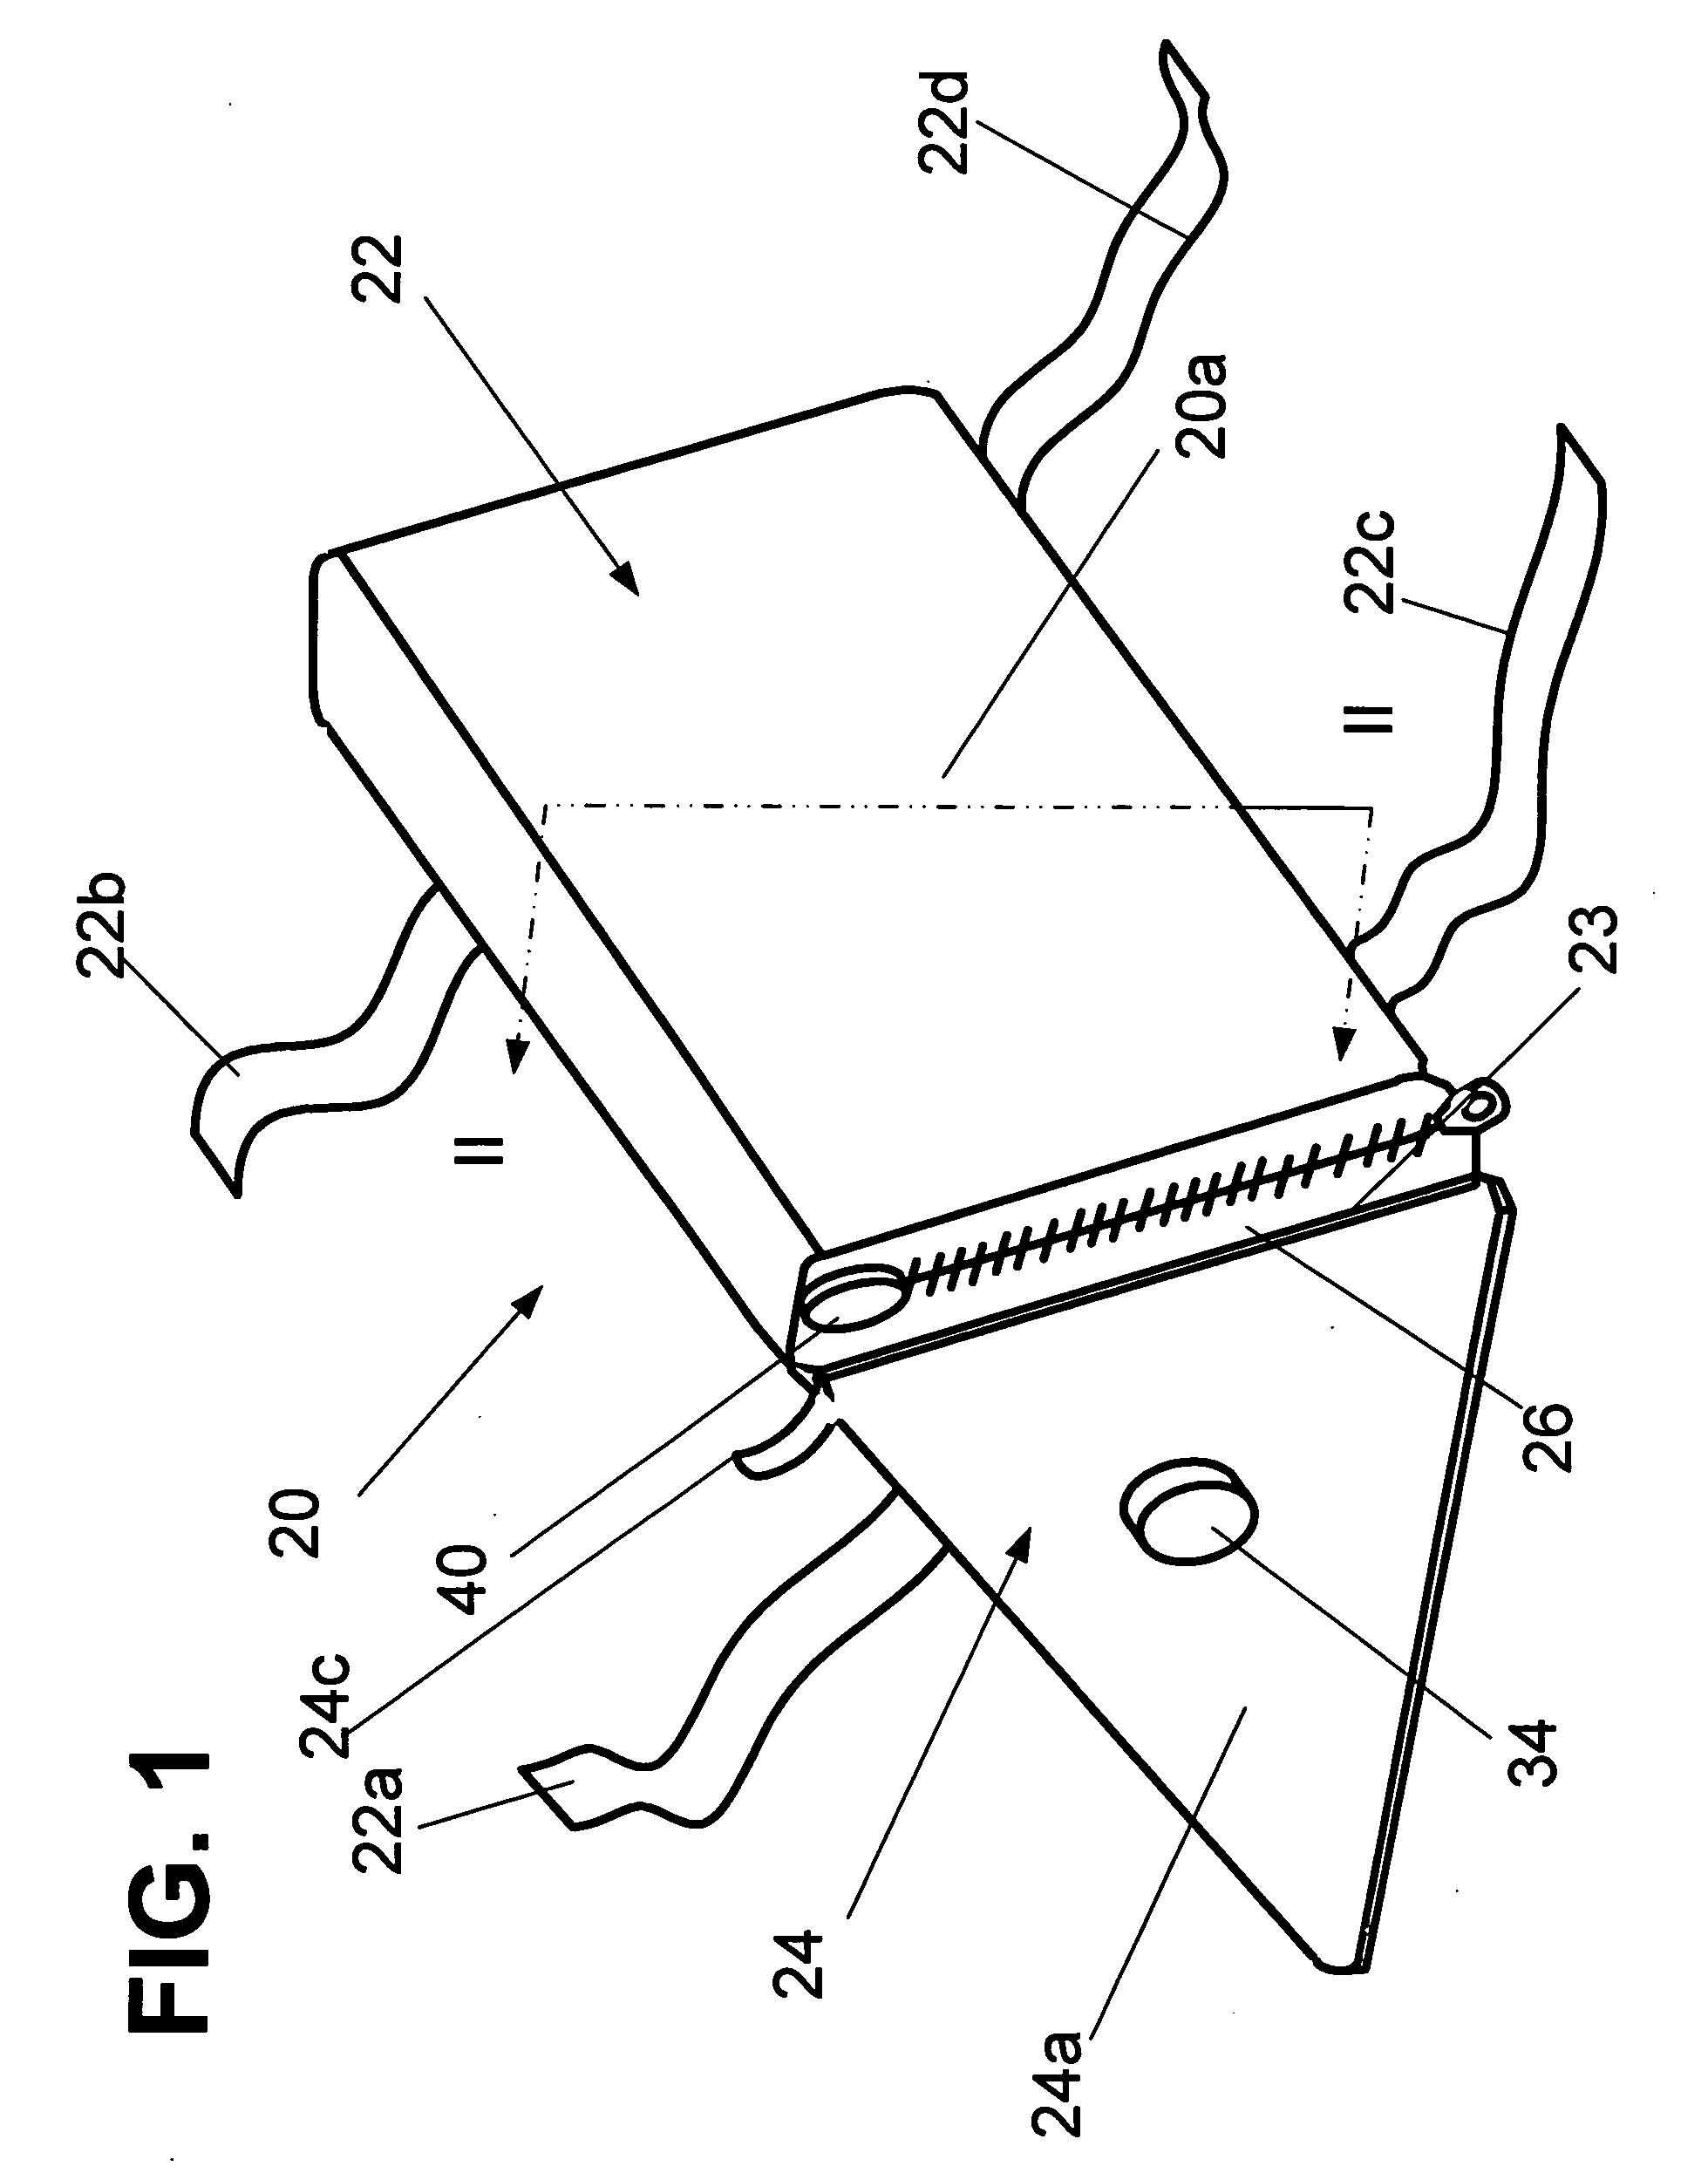 Thigh support with vibratory device for improved blood circulation